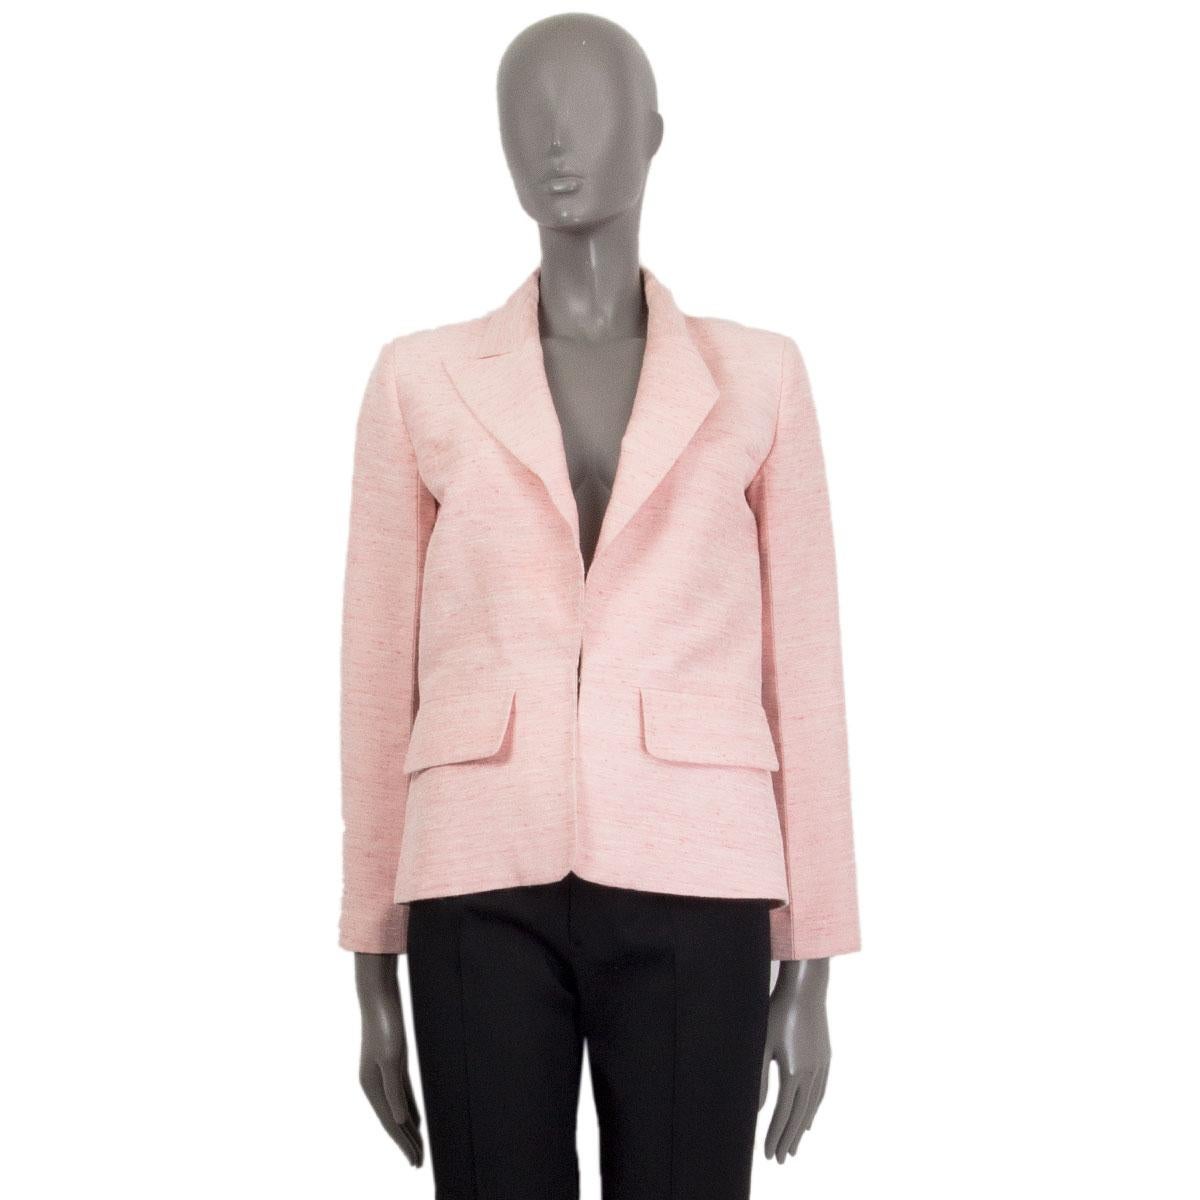 100% authentic Chanel 2017 Cuba peak-collar blazer in baby pink silk duping (100%). With two flap pockets on the front, back slit and signature chain around the inside of the hemline. Lined in baby pink silk (100%). Brand new with tag. Please note